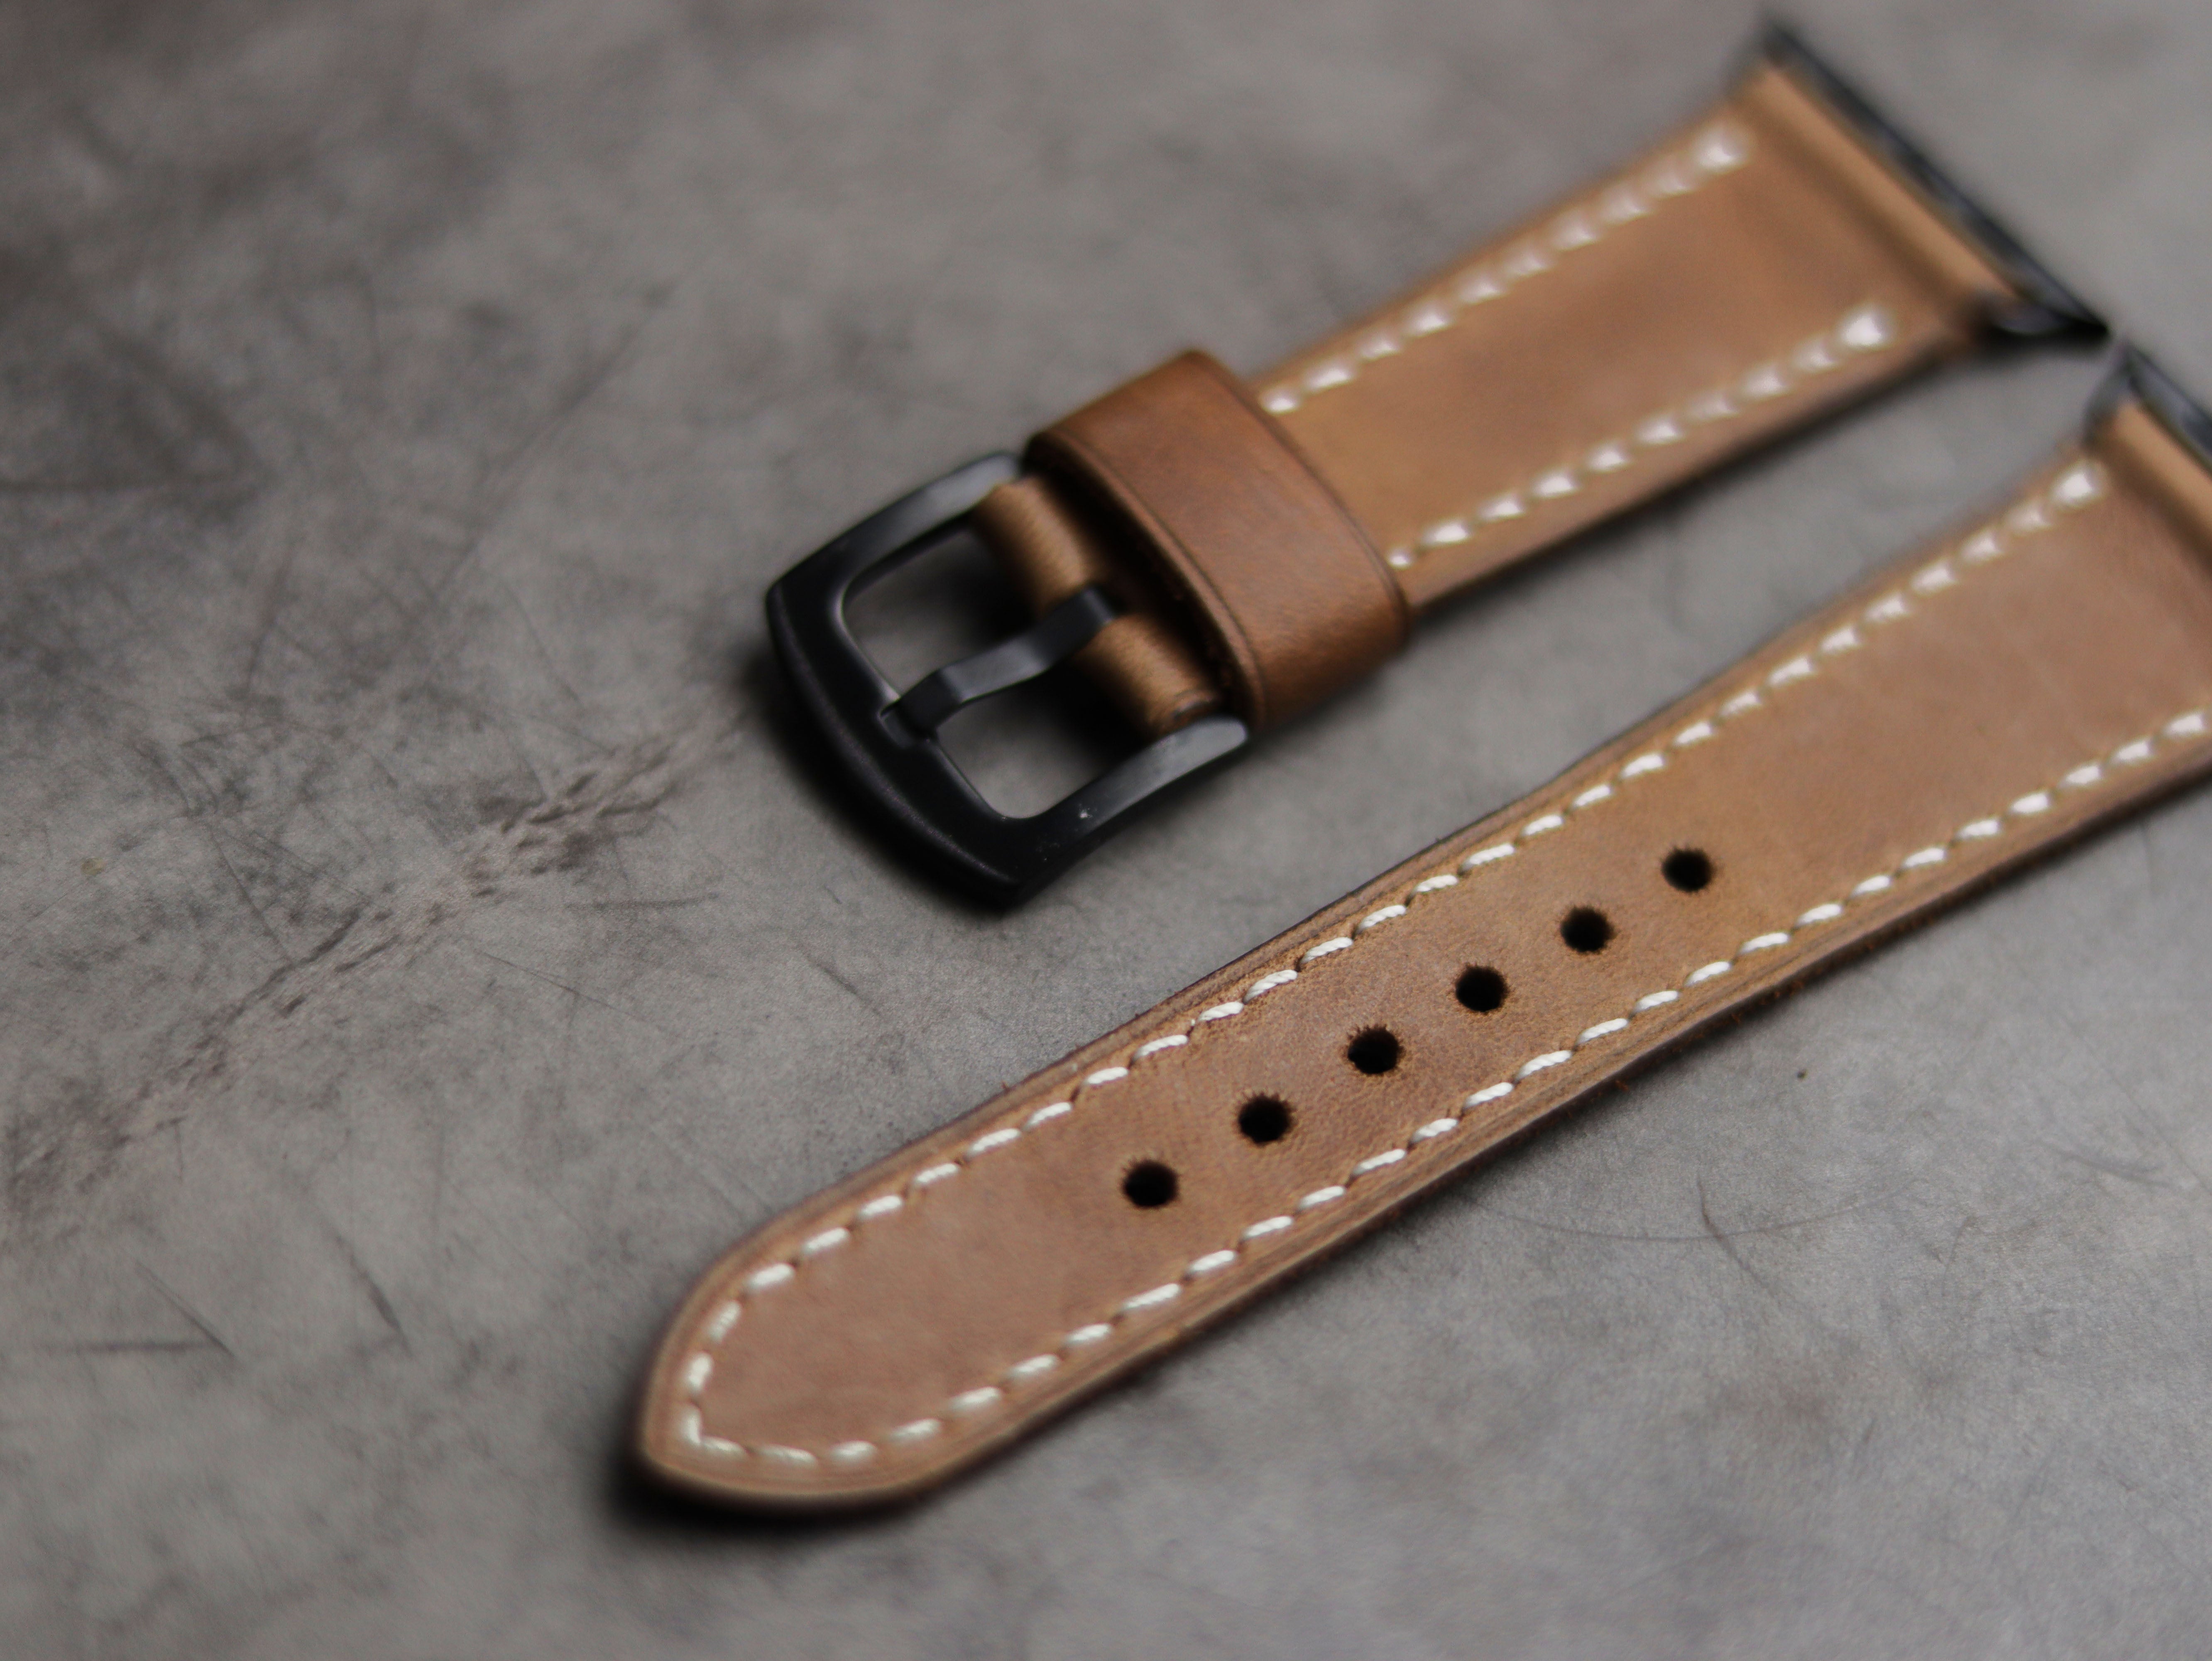 CARAMEL BROWN LEATHER - APPLE WATCH STRAPS HAND-CRAFTED